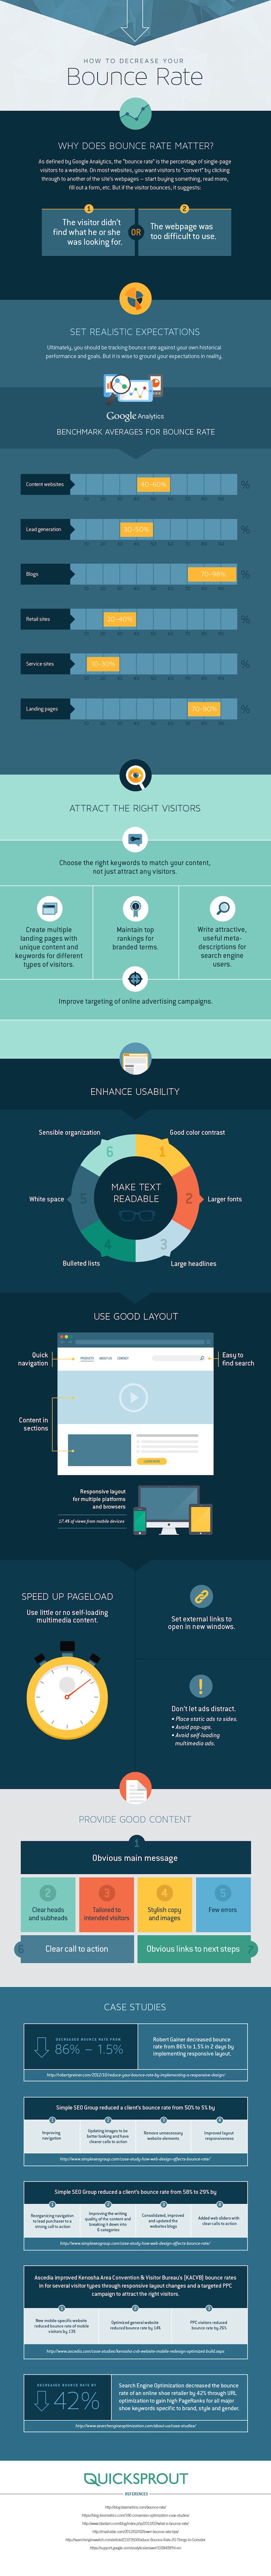 How to Reduce Bounce Rate infographic